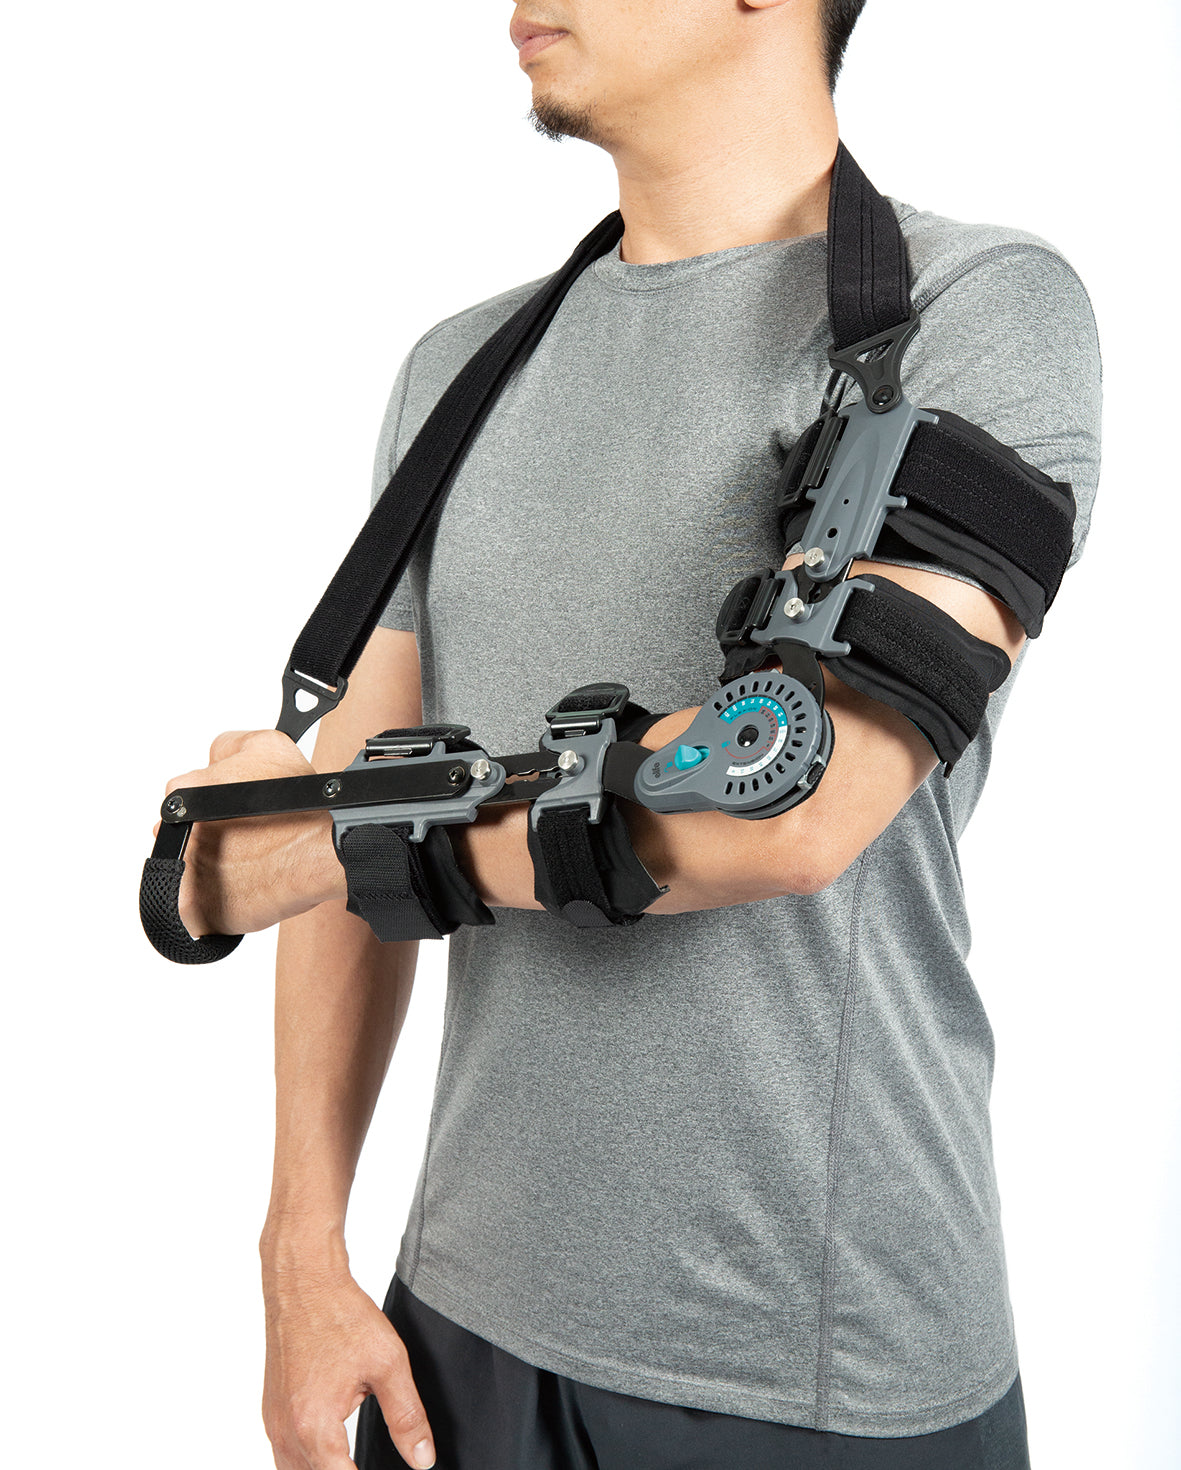 Light, multi-functional elbow brace for post-op recovery